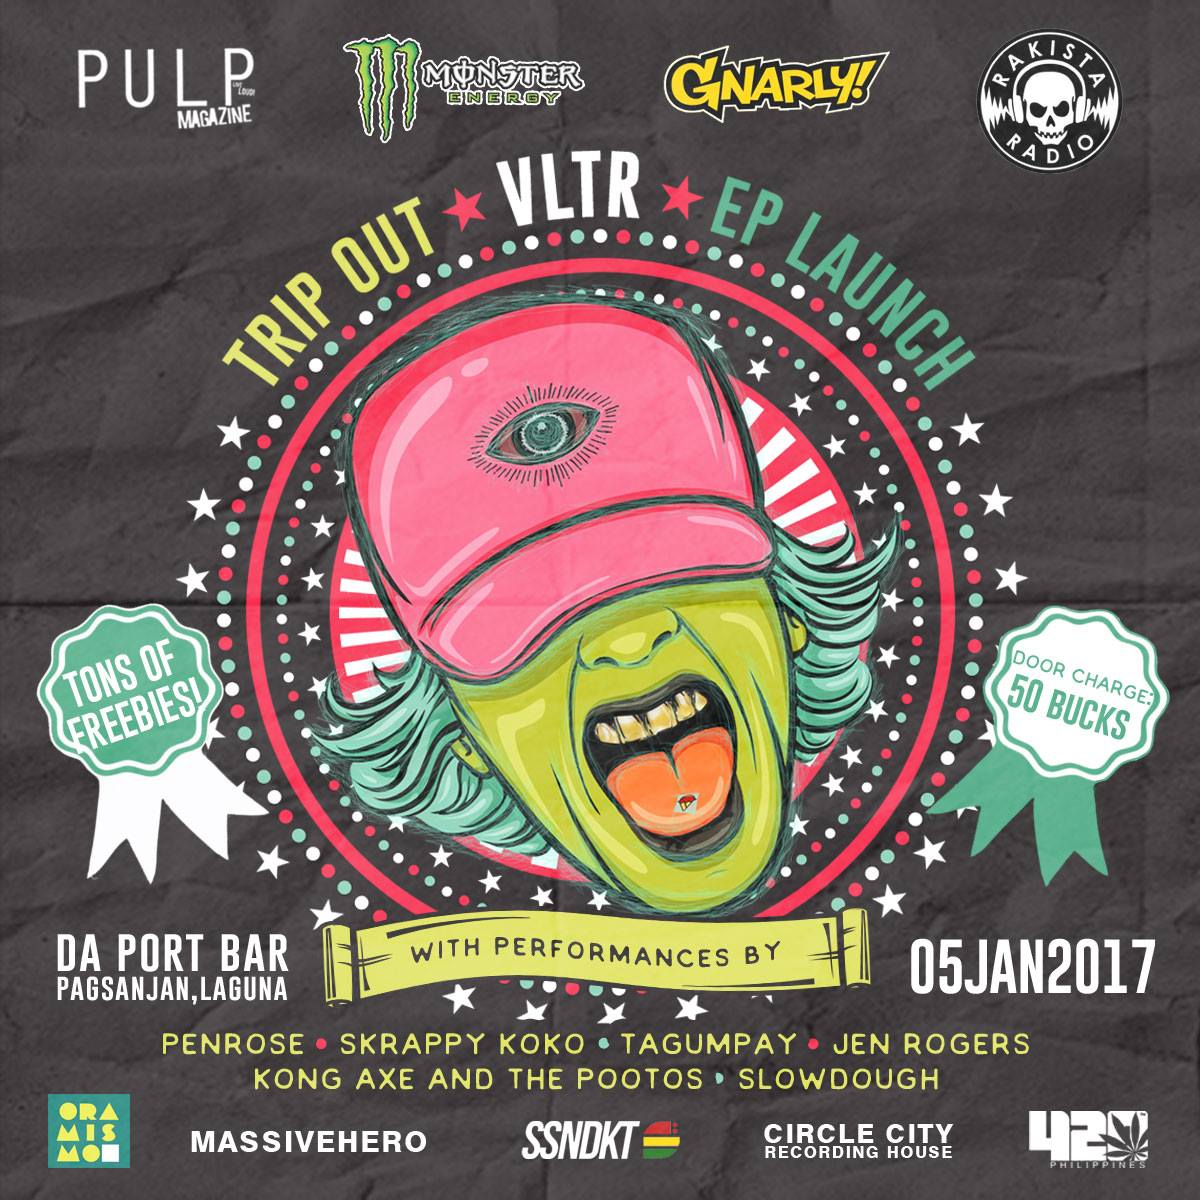 VLTR Page Liked · December 14 · VLTR - TRIP OUT EP LAUNCH | JANUARY 05, 2017 | DA PORT Just under 3 weeks away! Tickets available from the link below! powered by: PULP Magazine , Monster Energy , Gnarly! & Rakista Radio special thanks to: Ssndkt Production , Oramismo Productions, 420Philippines, Circle City Records & massivehero. well see yah all! cheers! #comingsoon #tripout! #vltr — with Kim Hesrod Siriban, Ude Bueno, Jal Abelilla and 47 others.